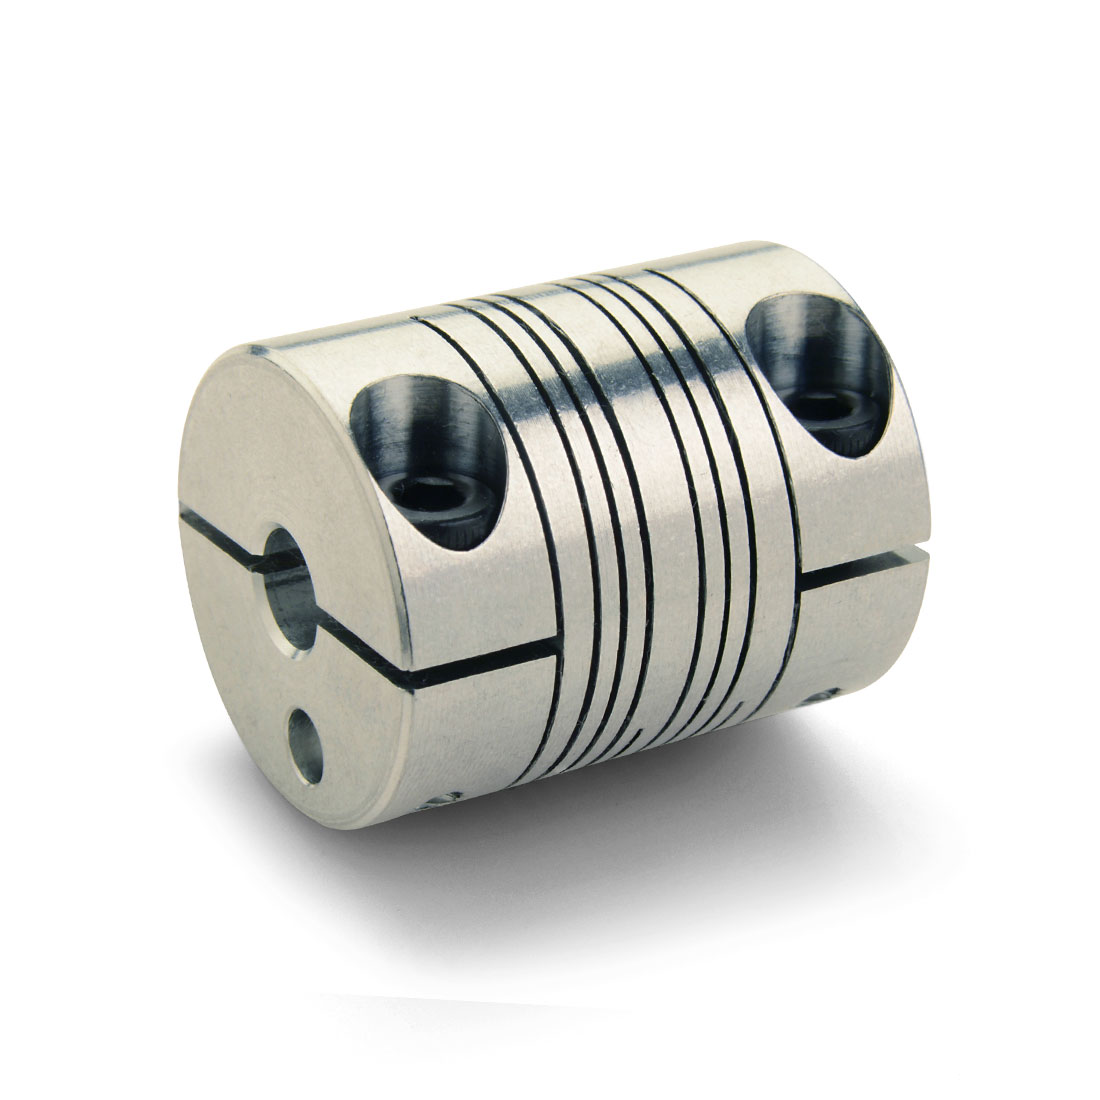 50.8 mm OD Ruland MBC51-19-14-A 2024 or 7075 Aluminum Hubs Bellows Coupling 19 mm x 14 mm Bores Clamp Style 58.7 mm Length 